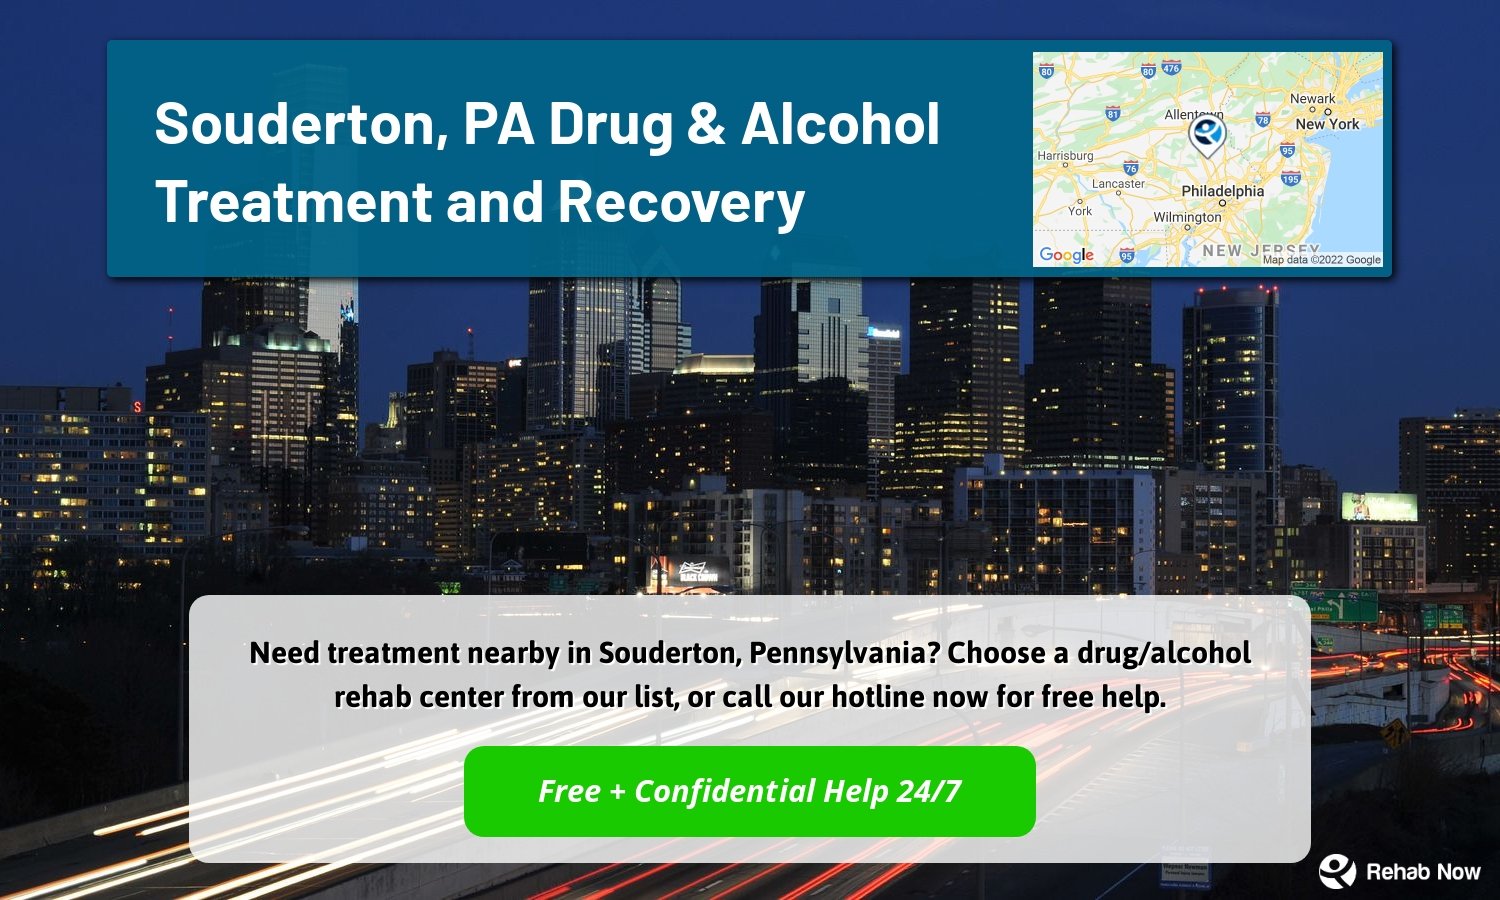 Need treatment nearby in Souderton, Pennsylvania? Choose a drug/alcohol rehab center from our list, or call our hotline now for free help.